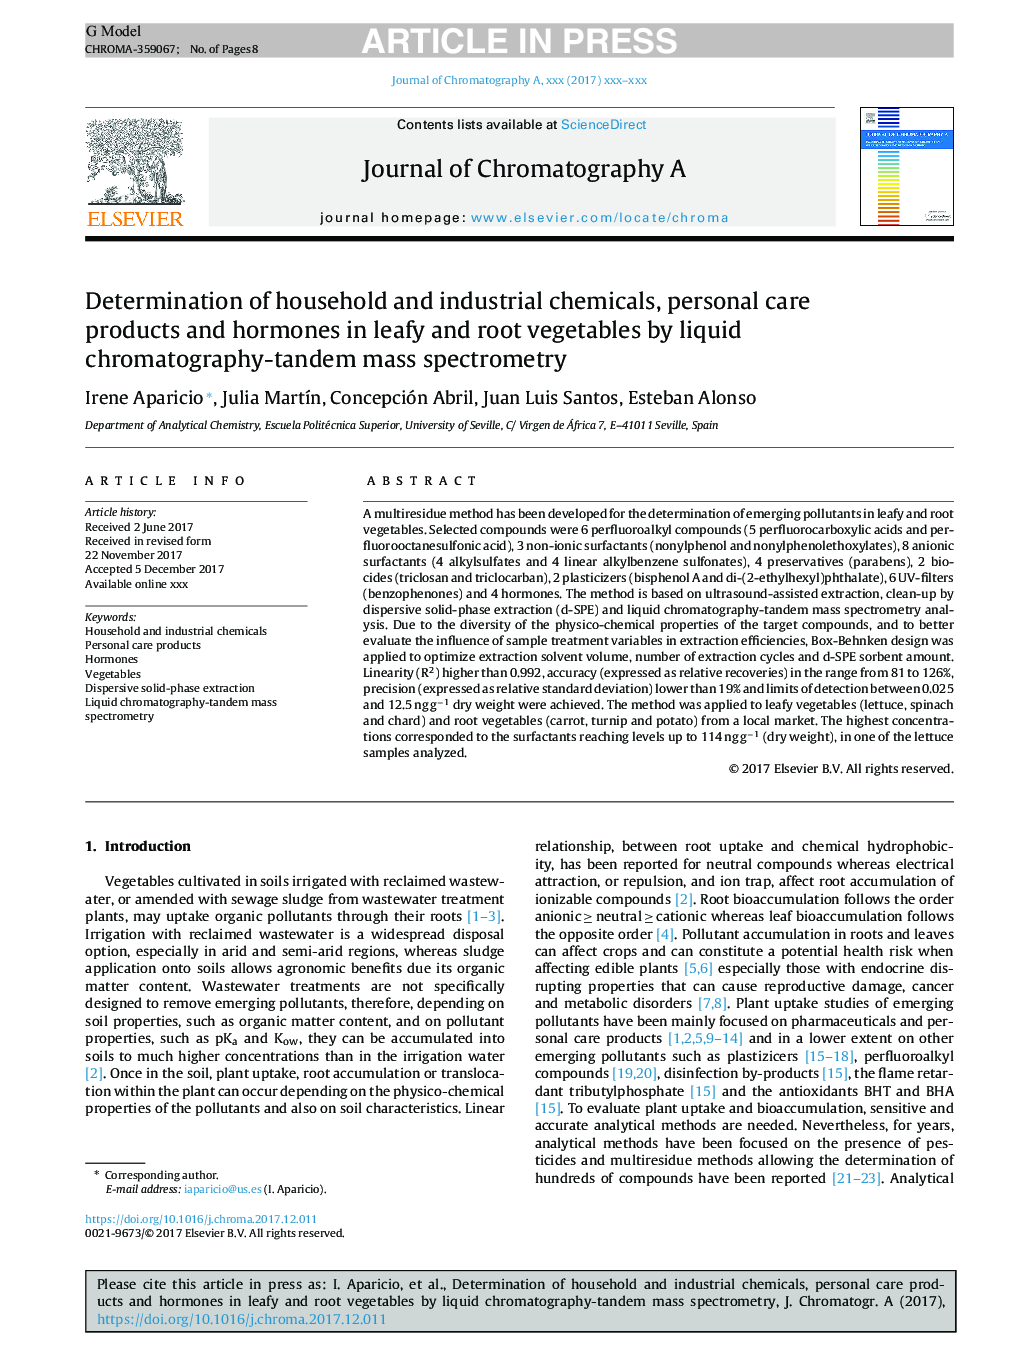 Determination of household and industrial chemicals, personal care products and hormones in leafy and root vegetables by liquid chromatography-tandem mass spectrometry